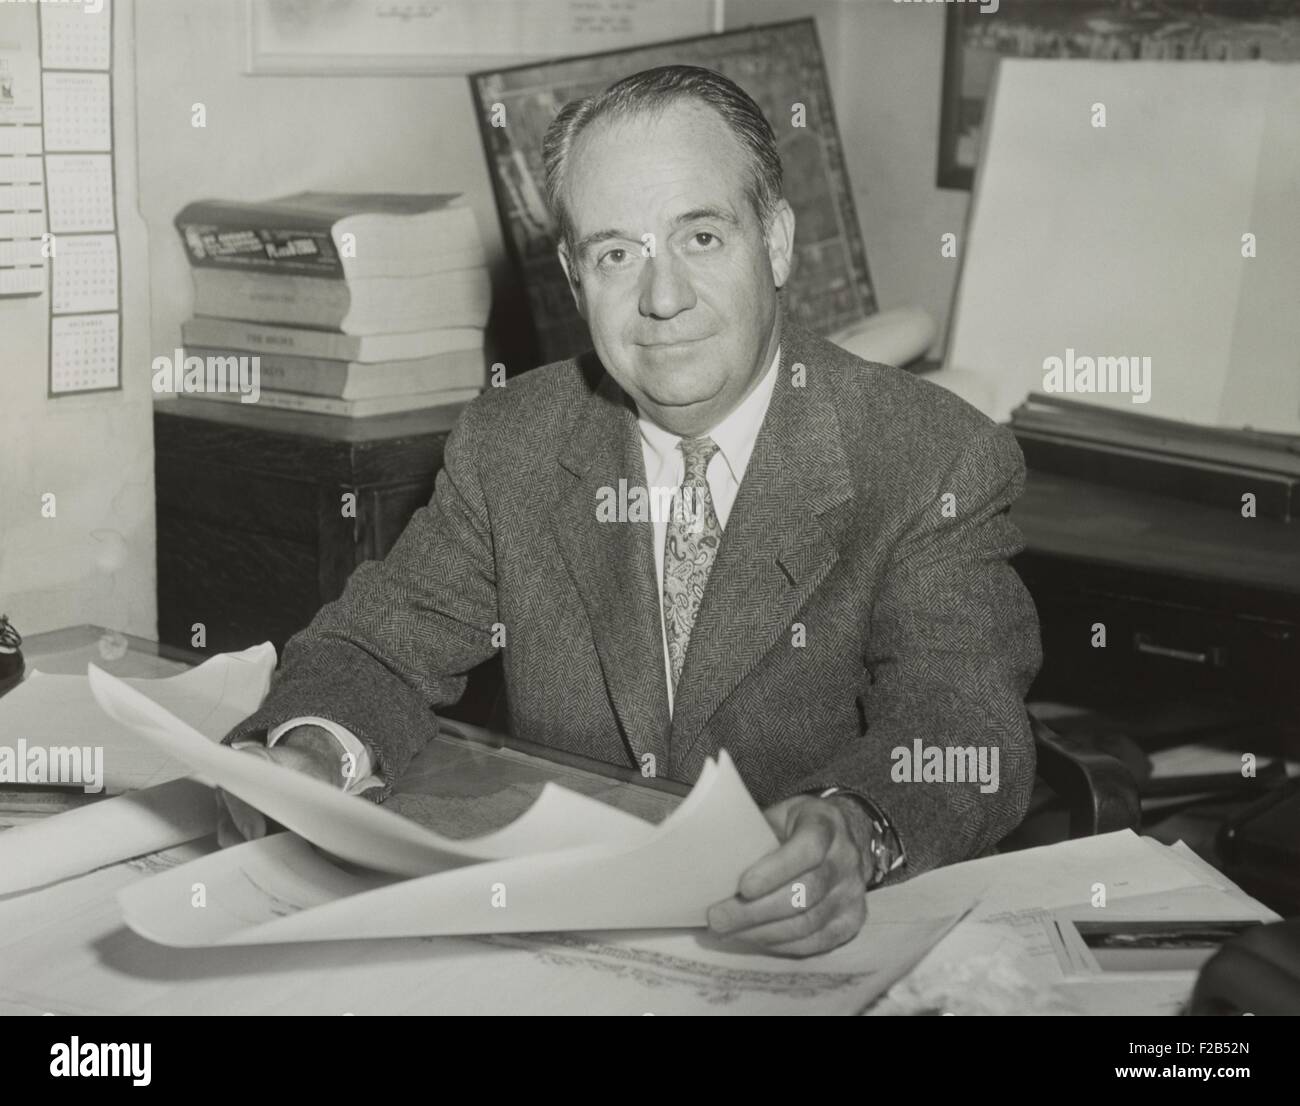 Robert Trent Jones, golf course architect, sitting at desk and holding drawings in 1953. - (BSLOC_2015_1_122) Stock Photo